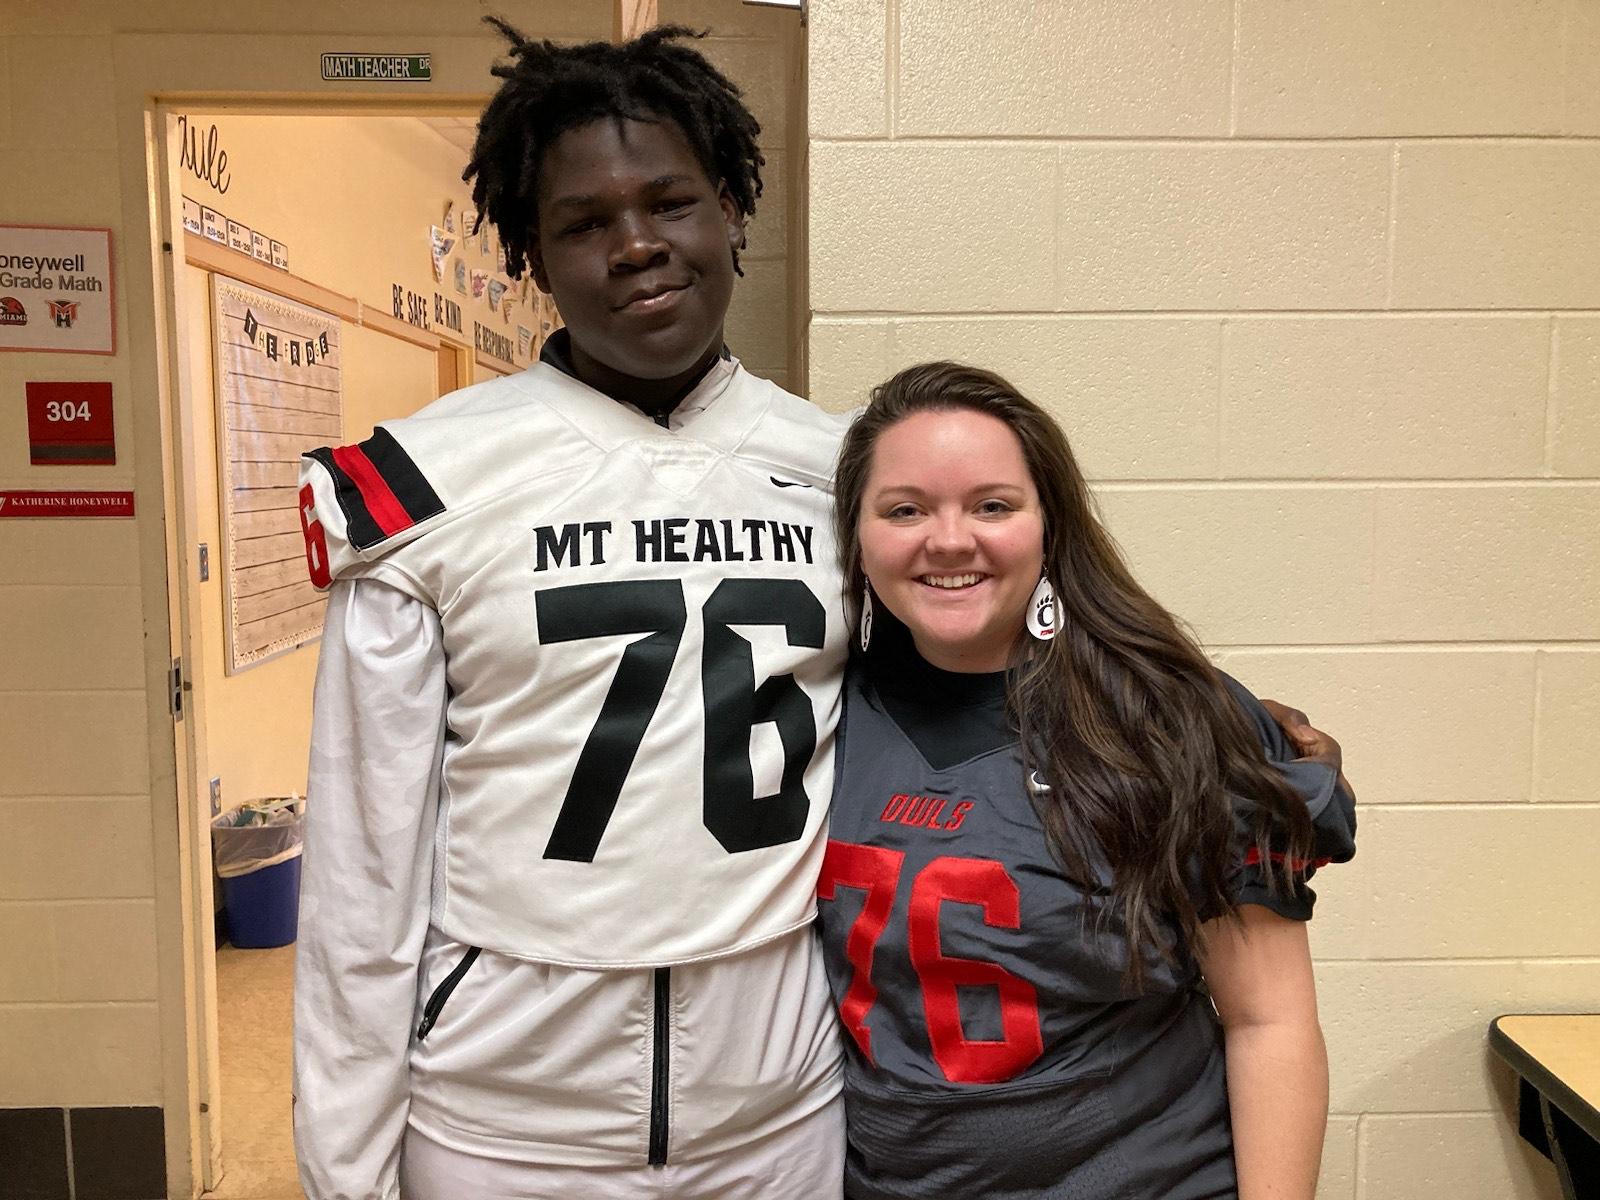 Mt Healthy High School staff member and student posing with football jerseys